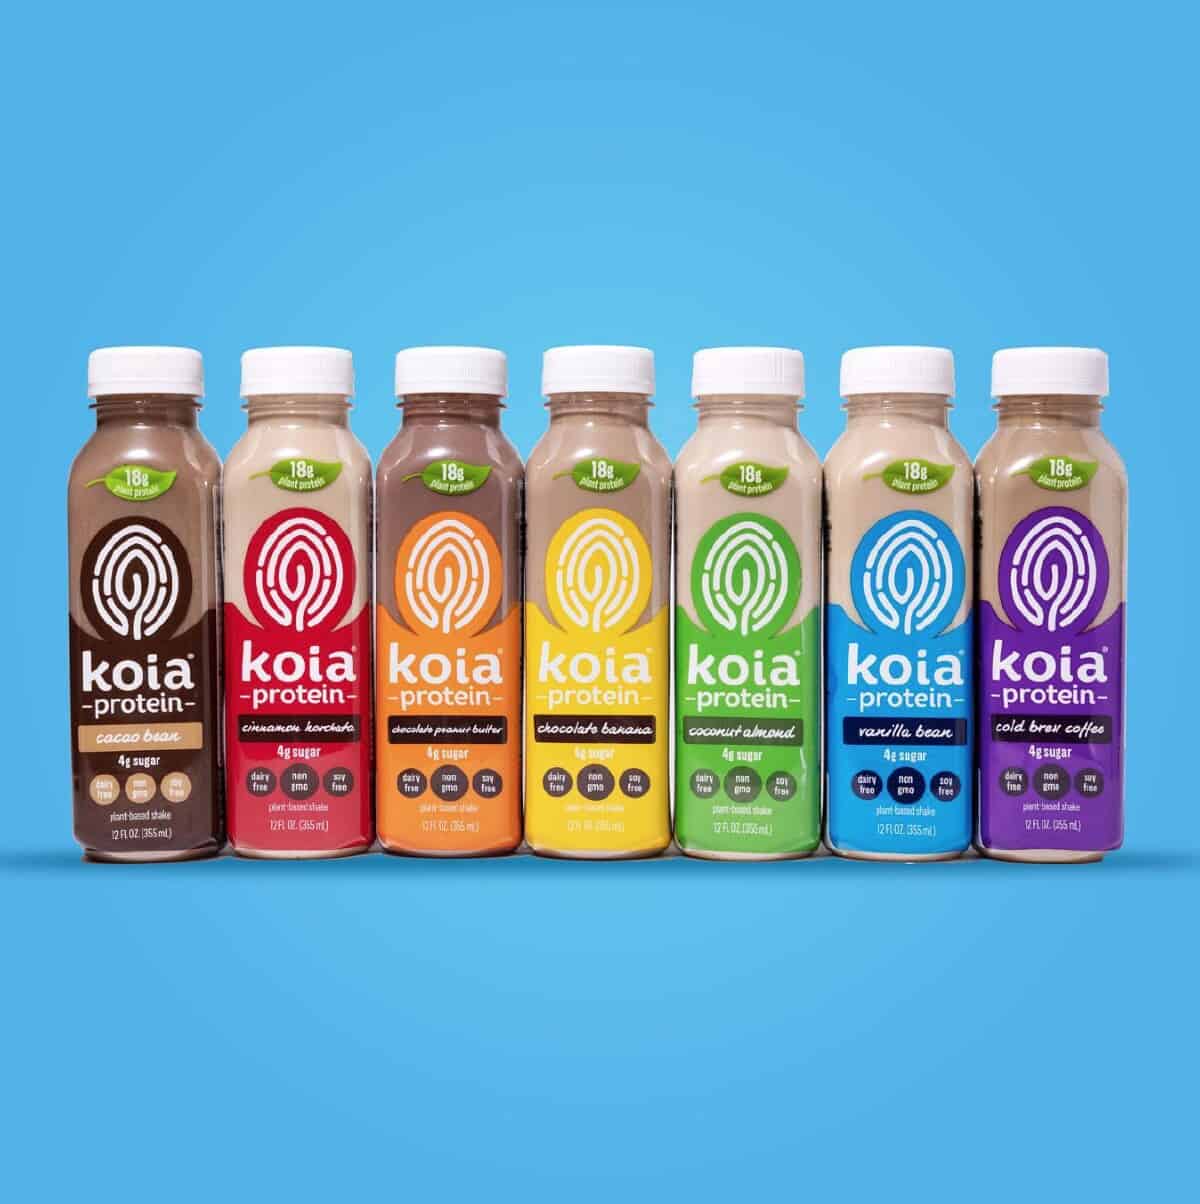 A line of seven rainbow colored Koia plant-based protein shakes against a light blue background.